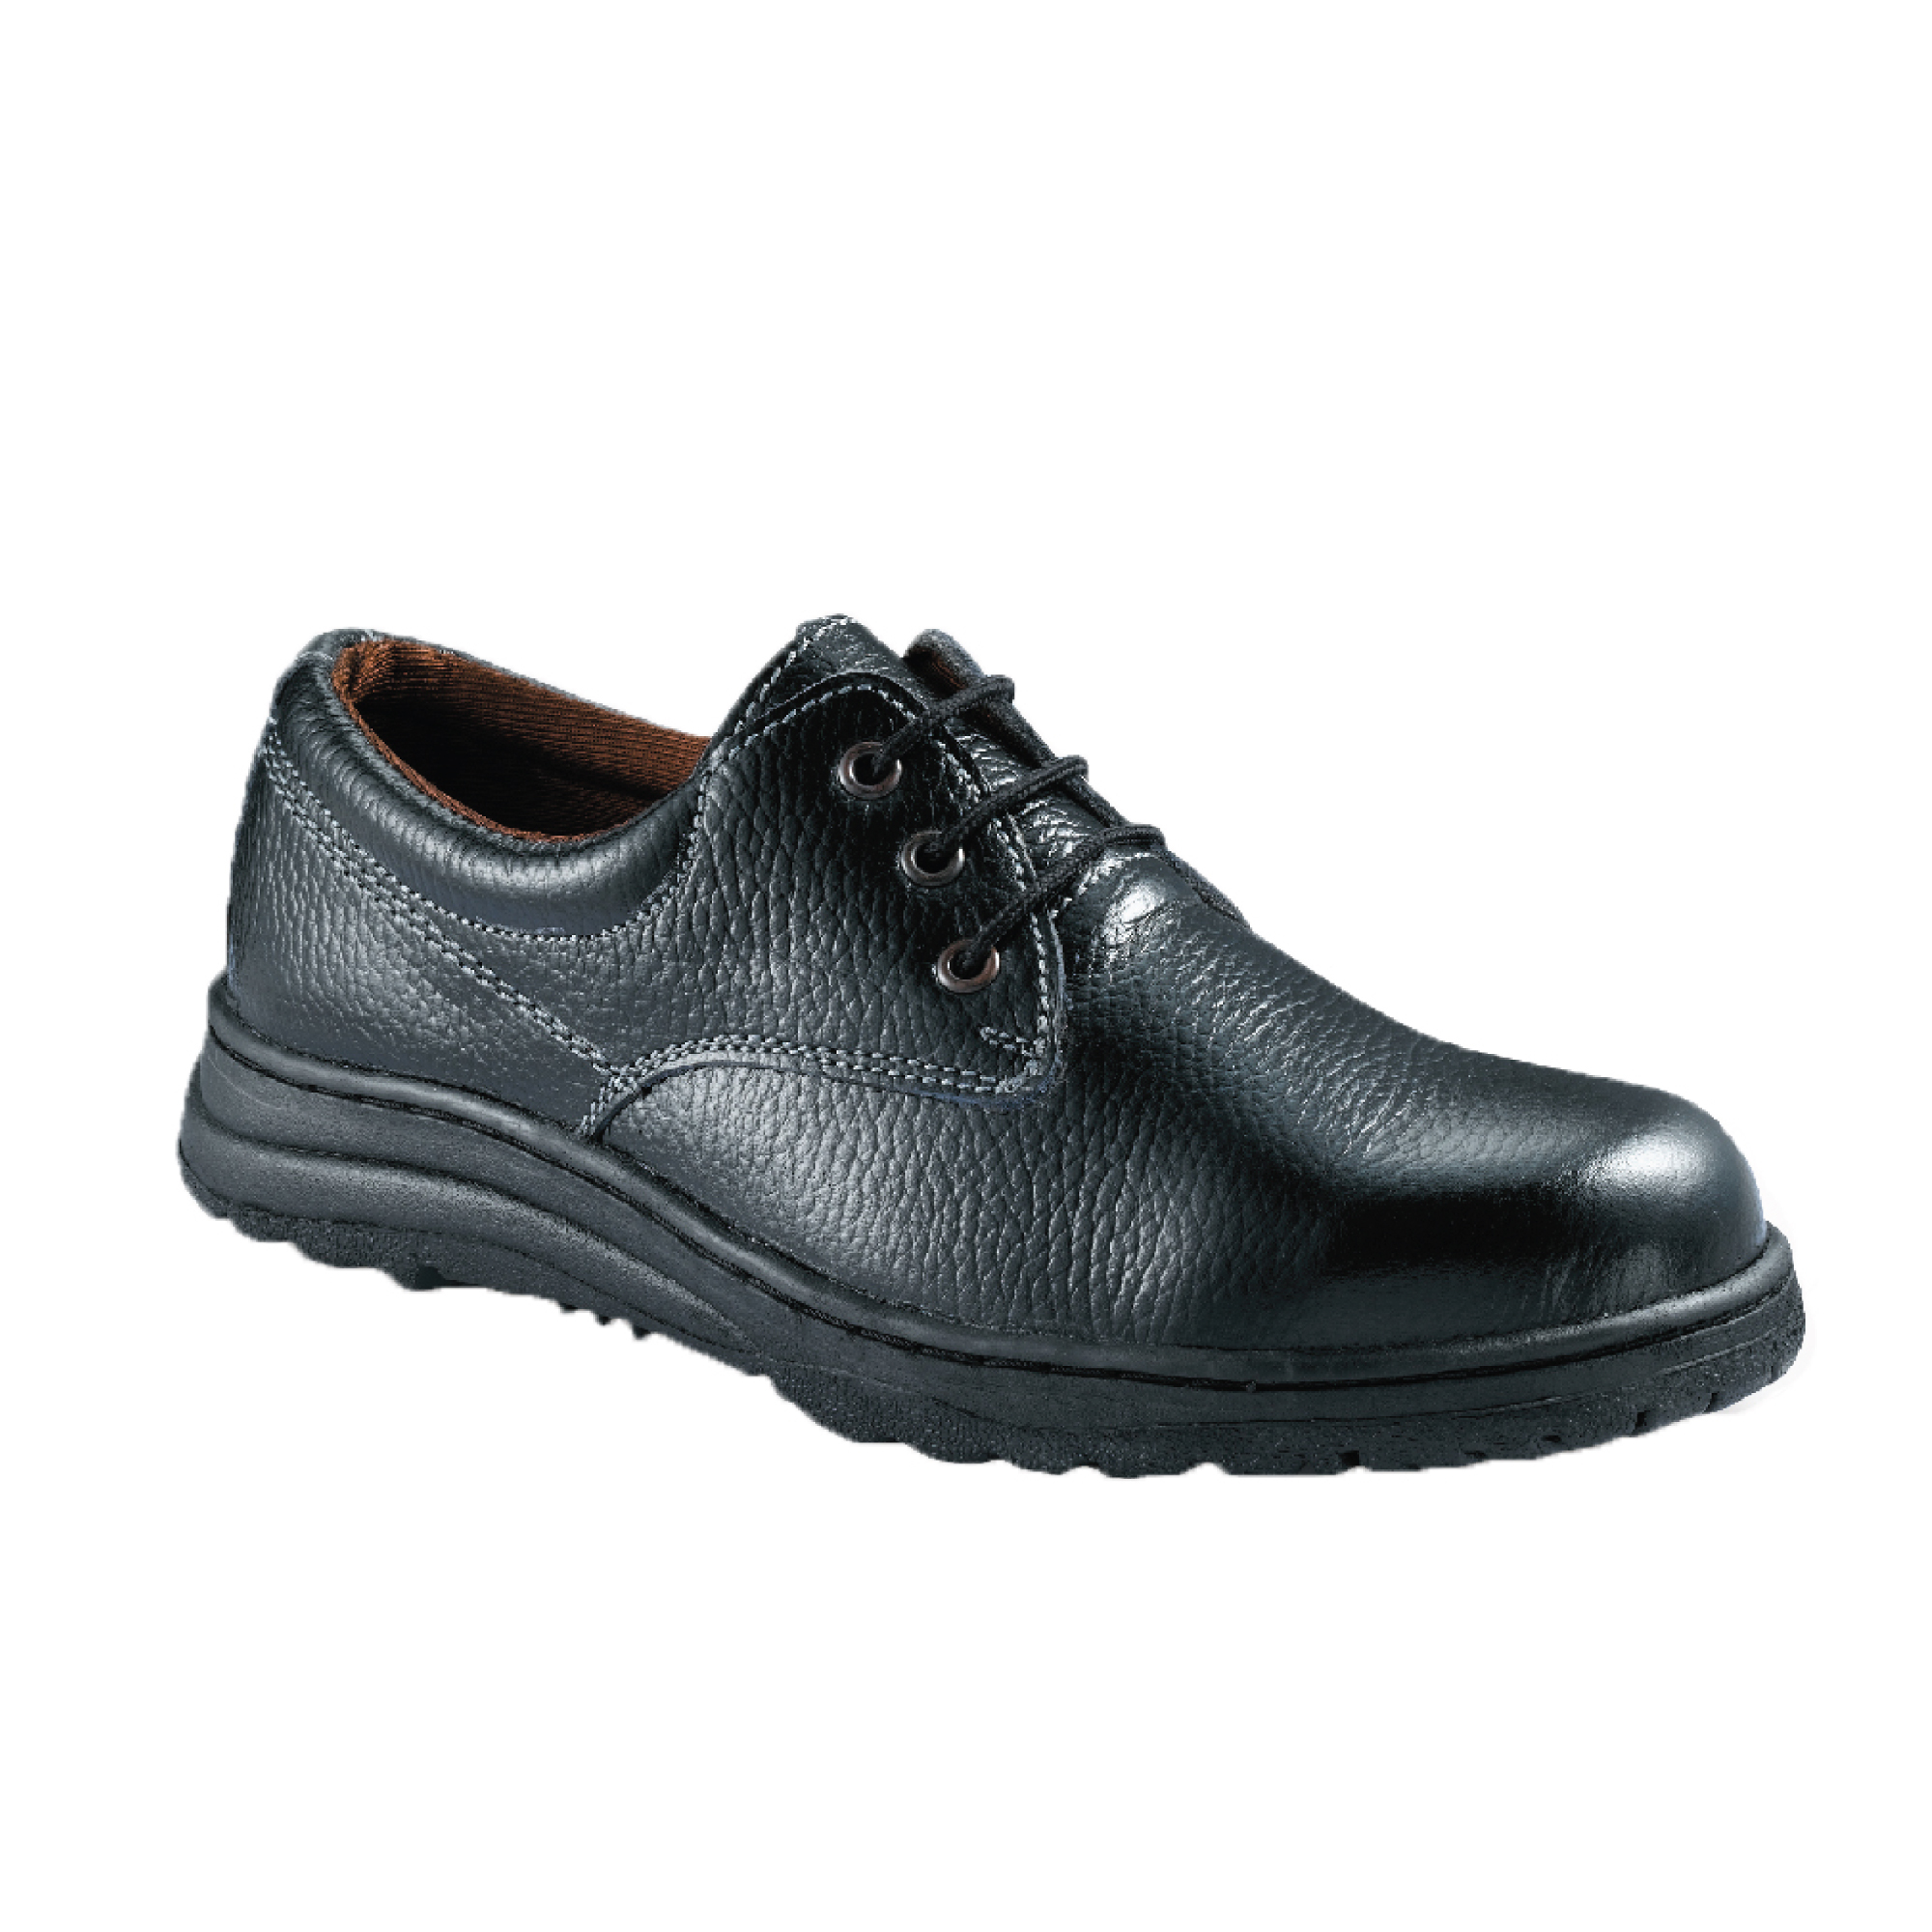 M3300-11 Safety Shoes